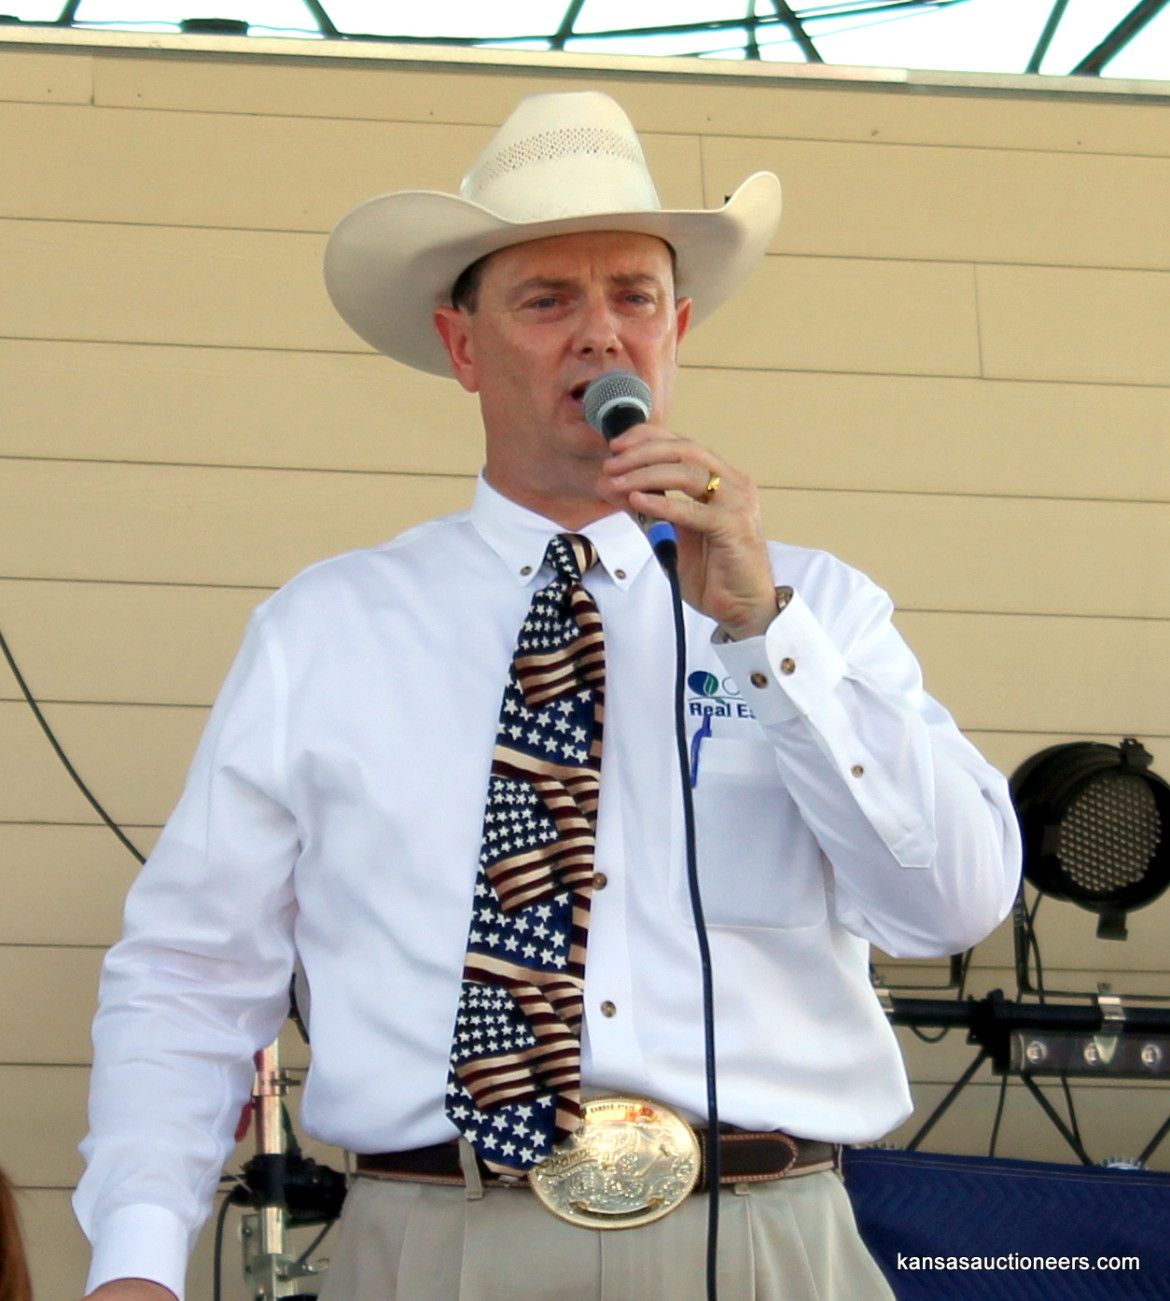 Lance Fullerton, 2014 Kansas Auctioneer Champion and MC of the 2015 finals.